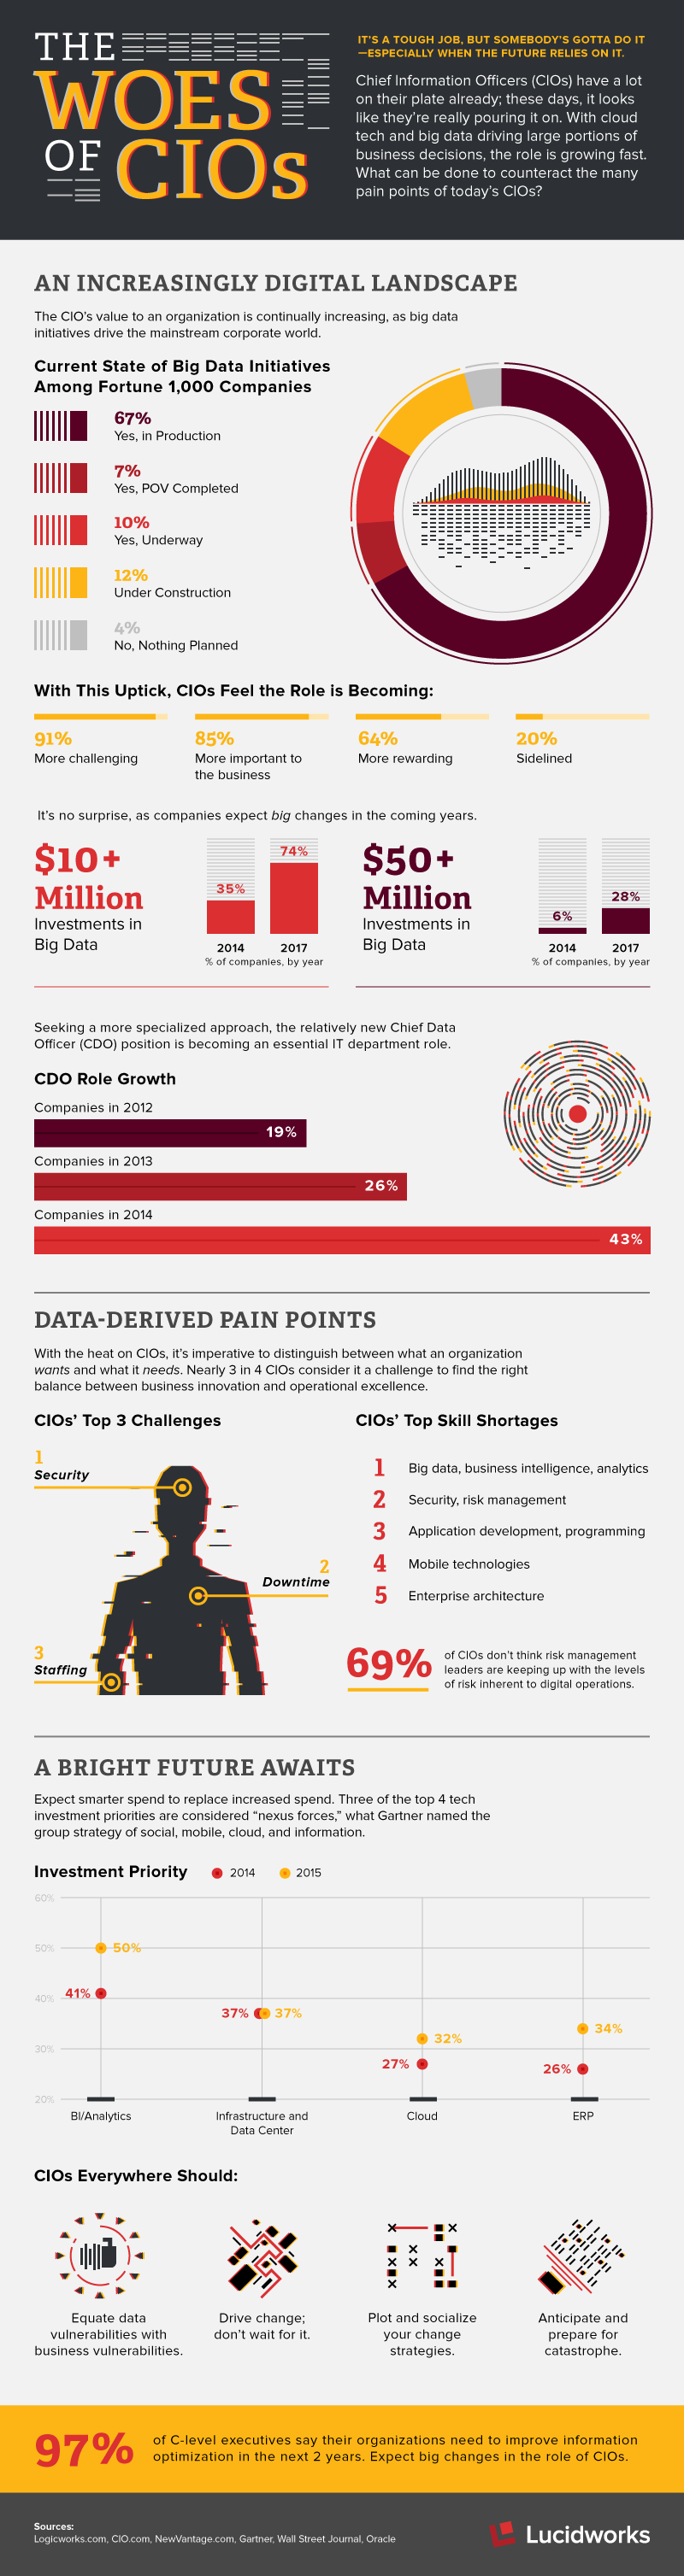 The Woes of the CIOs #infographic